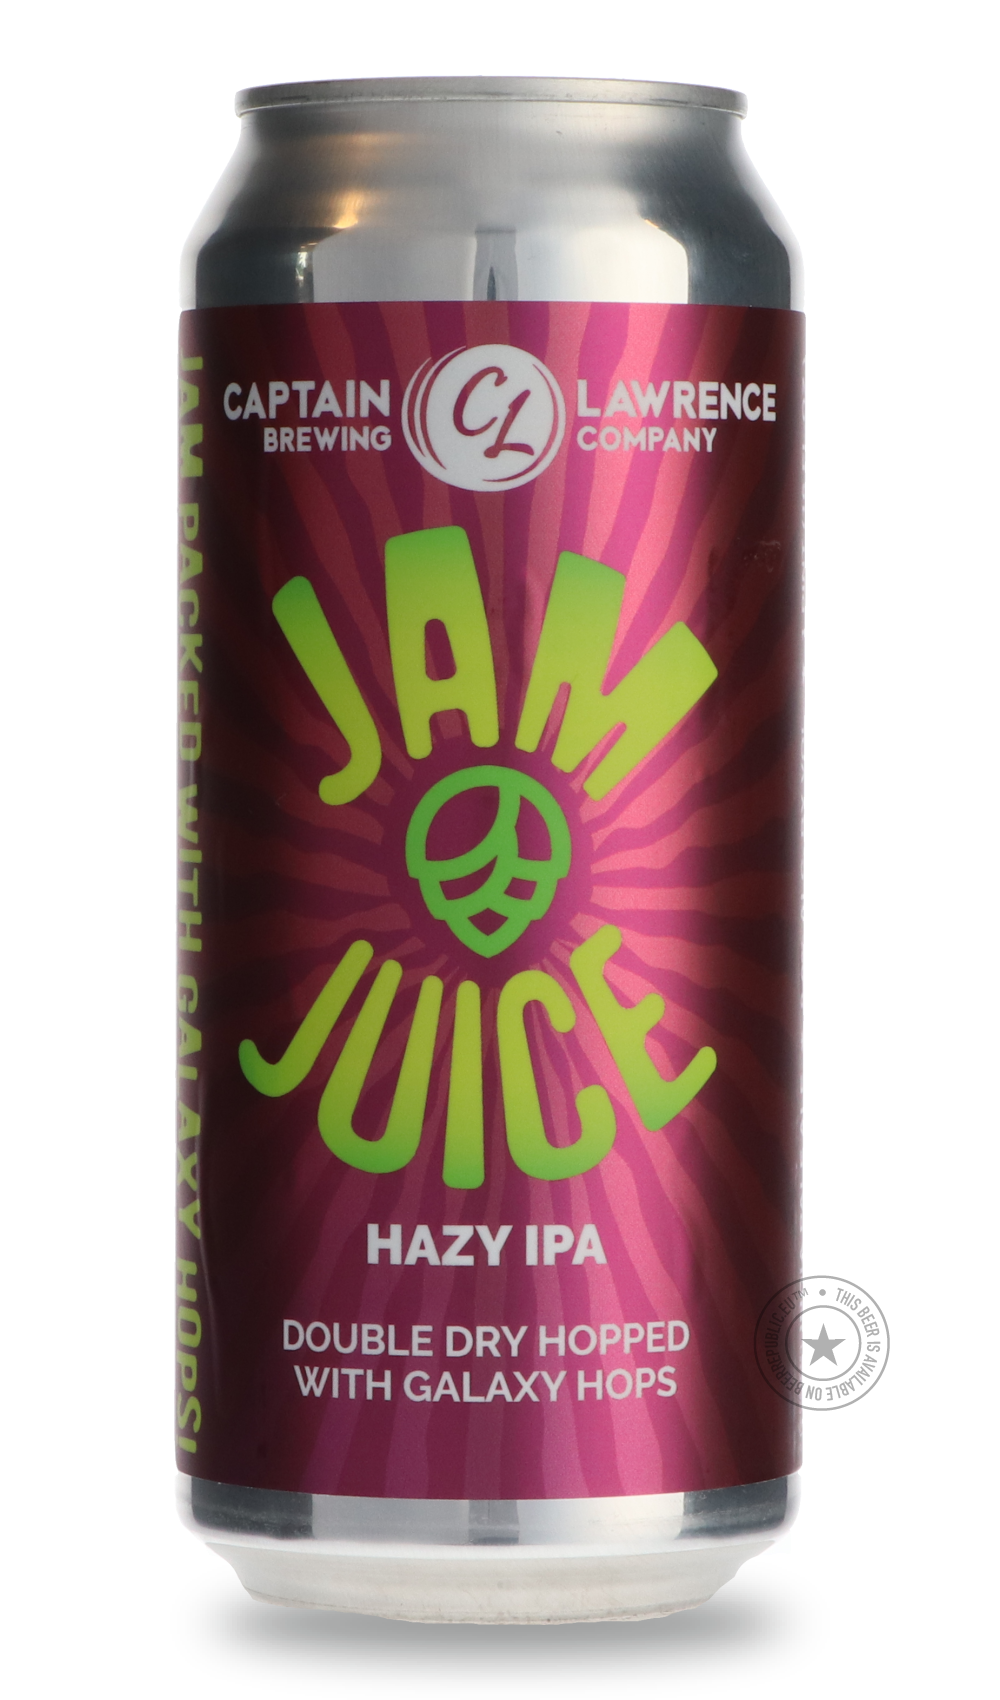 -Captain Lawrence- Jam Juice Hazy IPA-IPA- Only @ Beer Republic - The best online beer store for American & Canadian craft beer - Buy beer online from the USA and Canada - Bier online kopen - Amerikaans bier kopen - Craft beer store - Craft beer kopen - Amerikanisch bier kaufen - Bier online kaufen - Acheter biere online - IPA - Stout - Porter - New England IPA - Hazy IPA - Imperial Stout - Barrel Aged - Barrel Aged Imperial Stout - Brown - Dark beer - Blond - Blonde - Pilsner - Lager - Wheat - Weizen - Amb